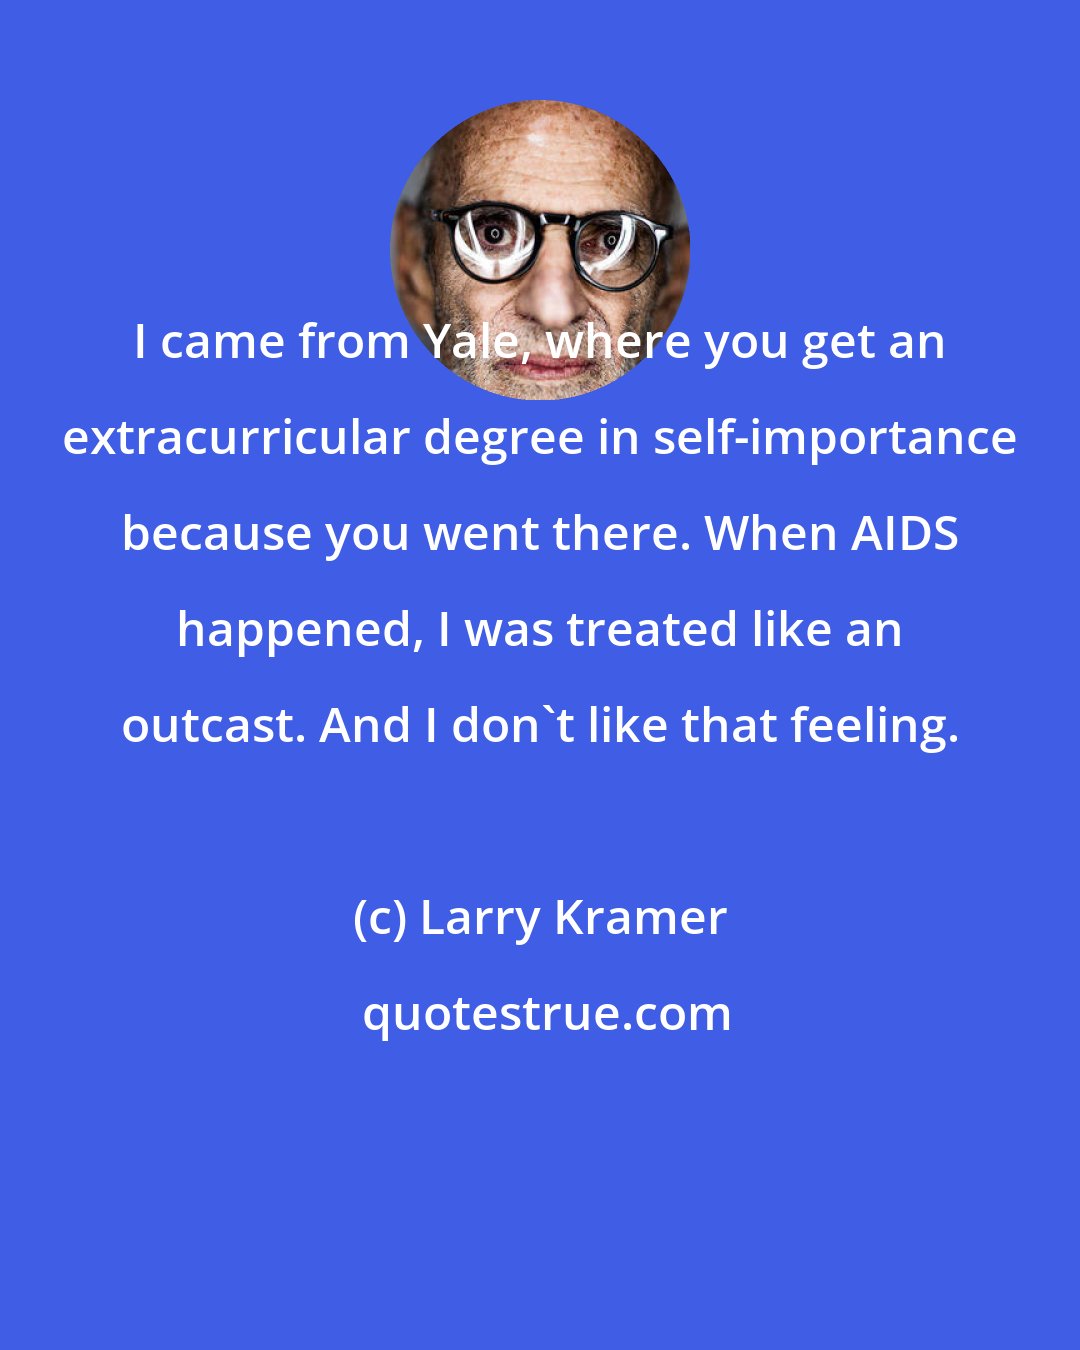 Larry Kramer: I came from Yale, where you get an extracurricular degree in self-importance because you went there. When AIDS happened, I was treated like an outcast. And I don't like that feeling.